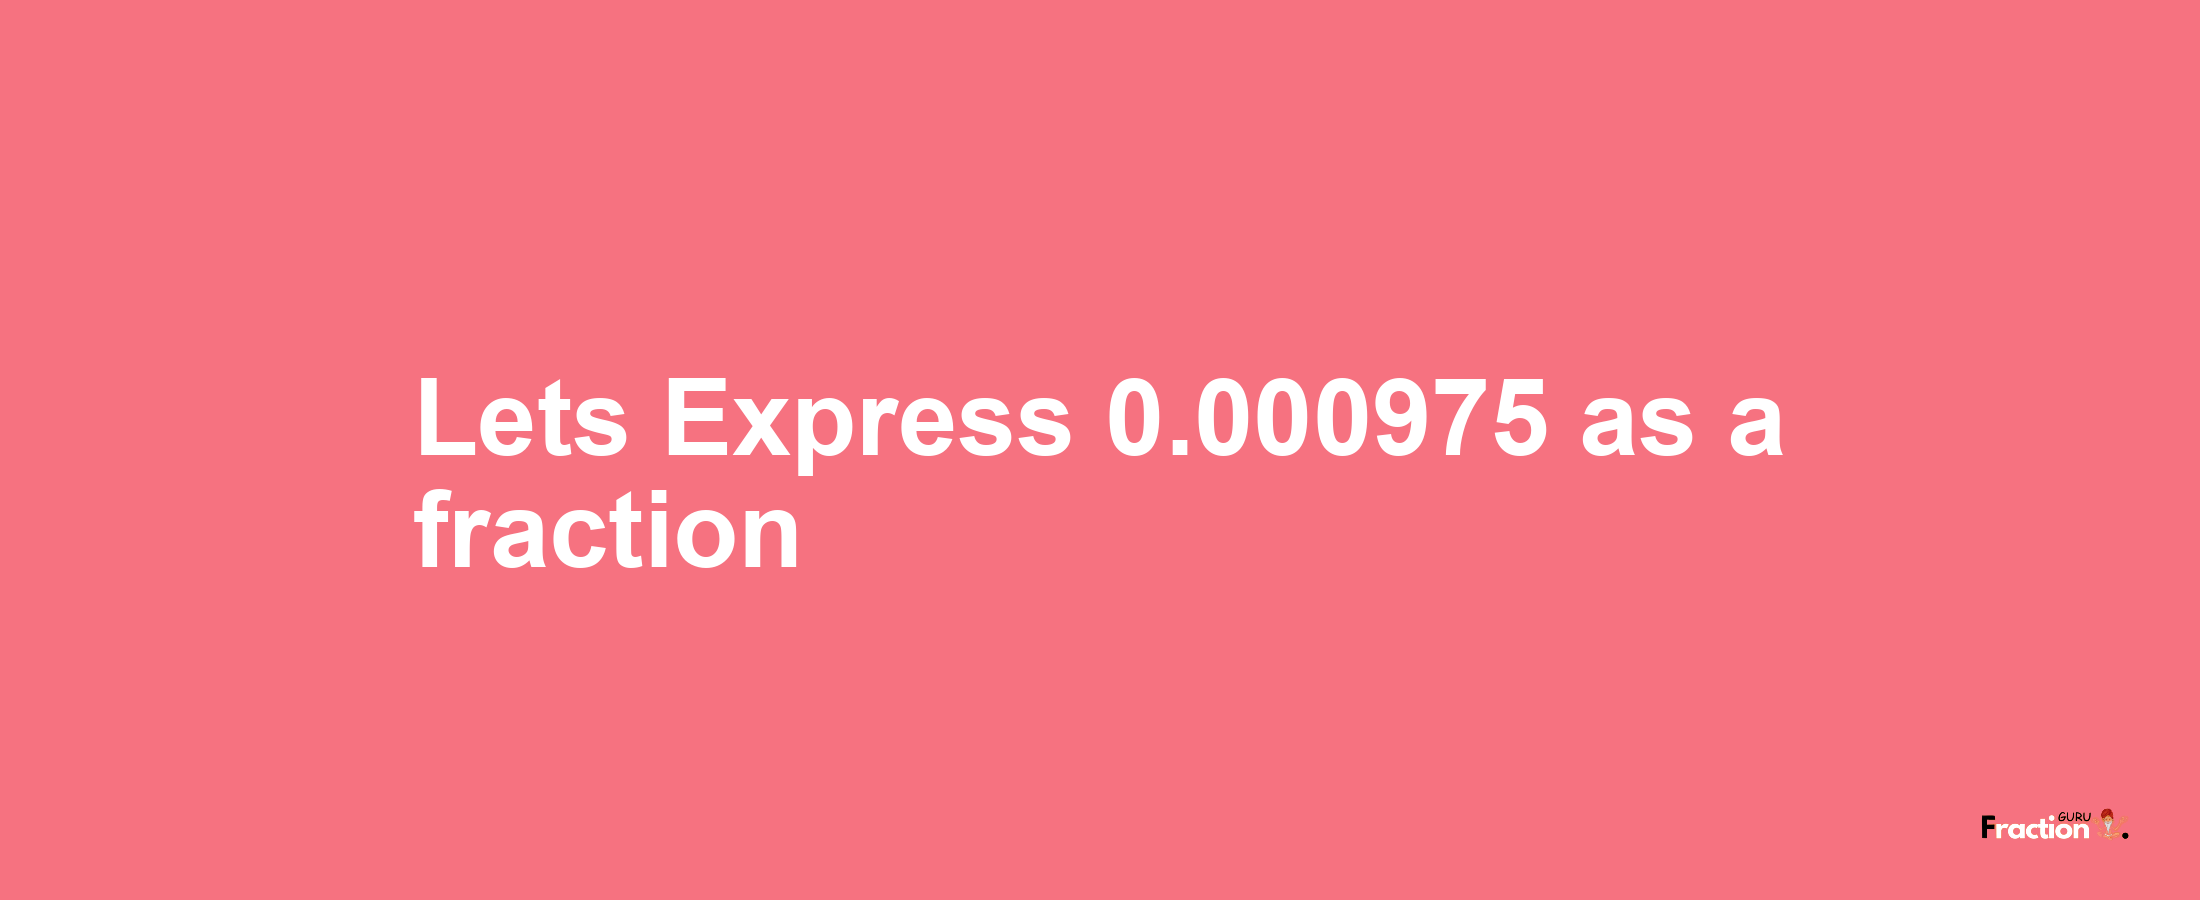 Lets Express 0.000975 as afraction